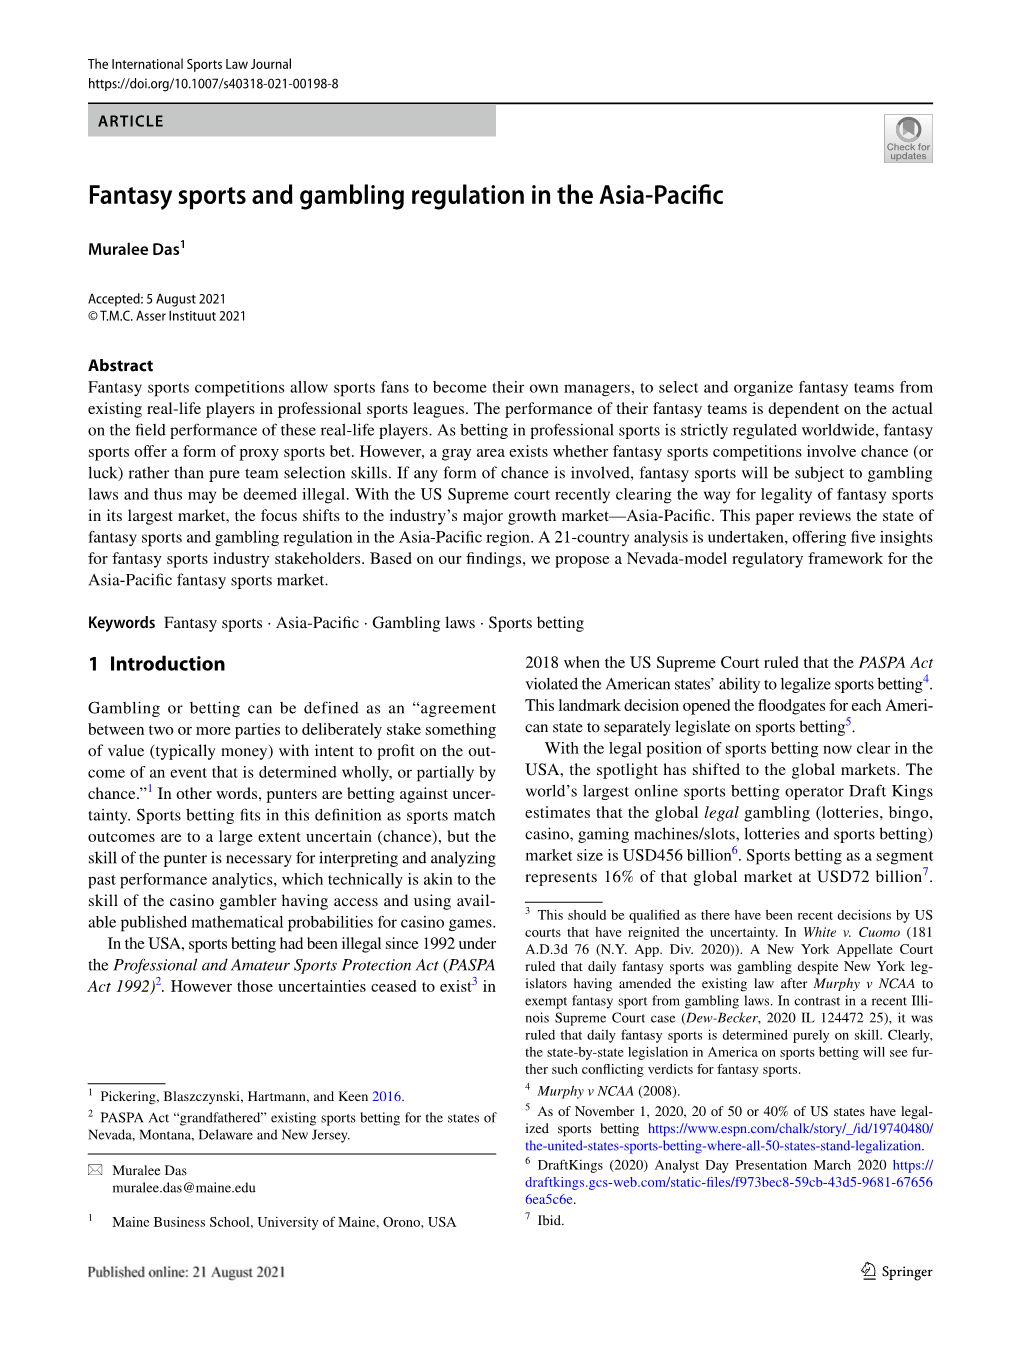 Fantasy Sports and Gambling Regulation in the Asia-Pacific